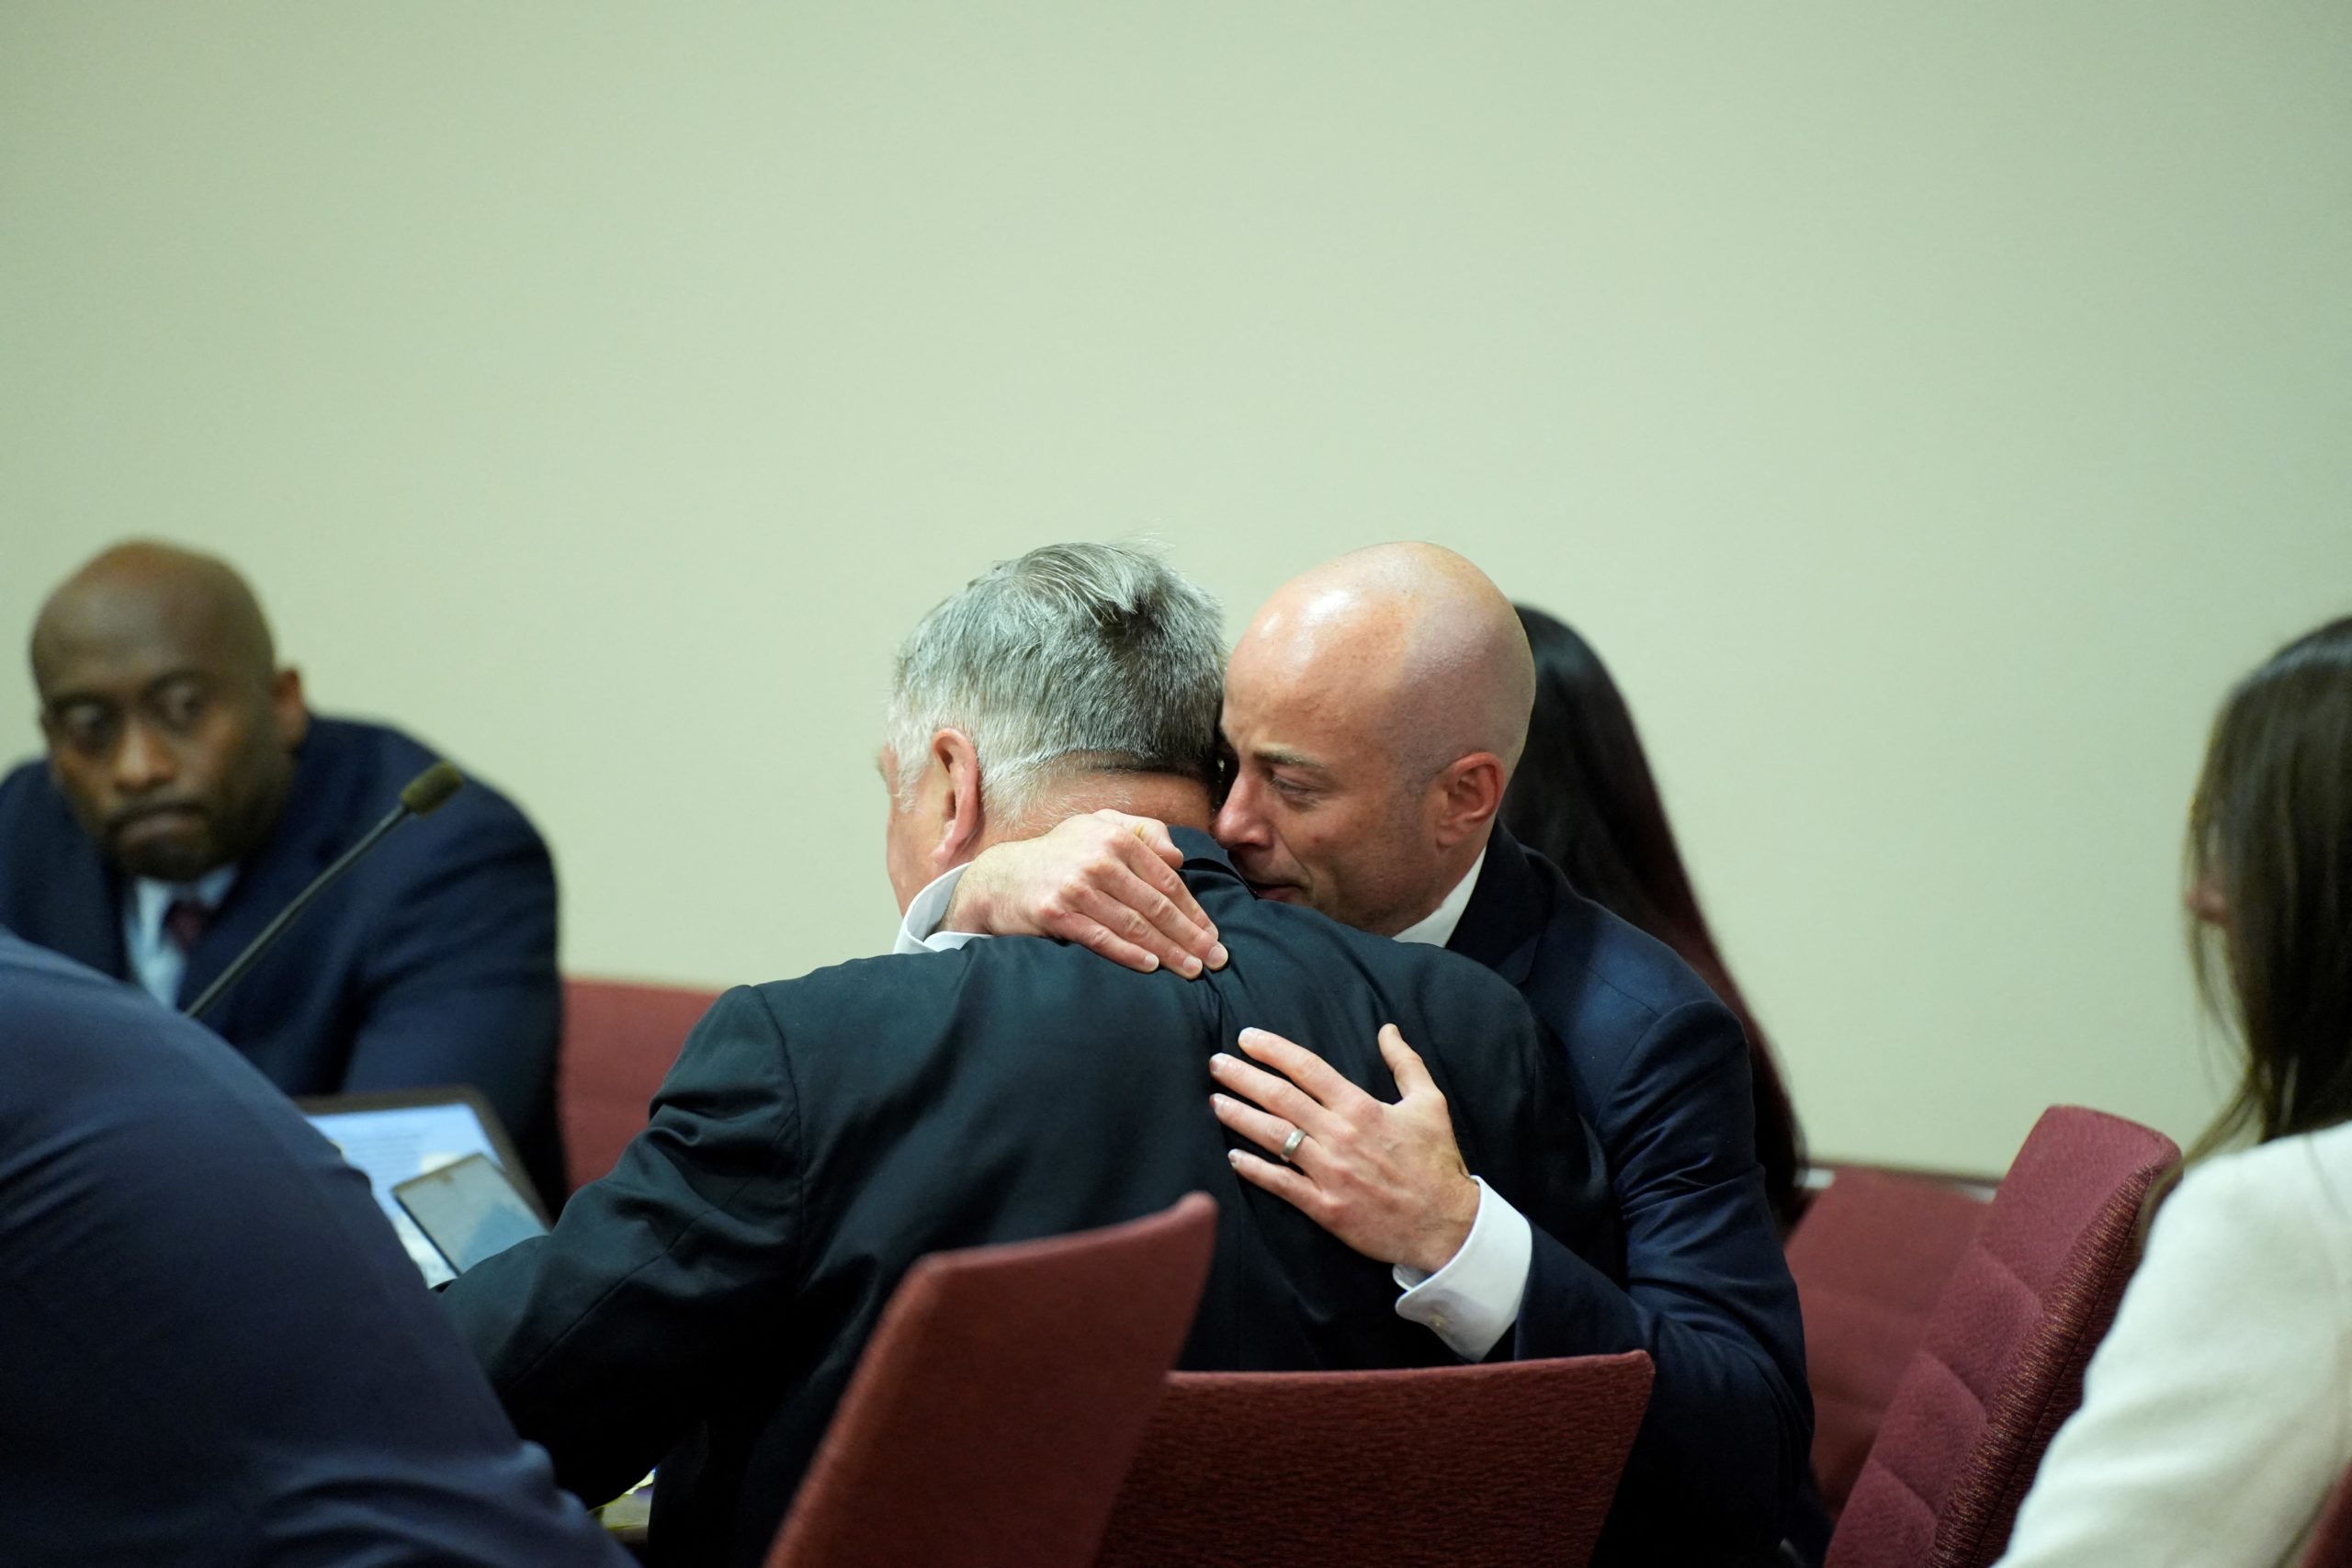 Attorney Luke Nikas embraces actor Alec Baldwin during his trial on involuntary manslaughter at Santa Fe County District Court in Santa Fe, New Mexico, on July 12, 2024. Baldwin's trial for involuntary manslaughter was dismissed by a judge Friday after she ruled that key evidence over a fatal shooting on the set of "Rust" had been withheld from the defense. (Photo by RAMSAY DE GIVE / POOL / AFP) (Photo by RAMSAY DE GIVE/POOL/AFP via Getty Images)